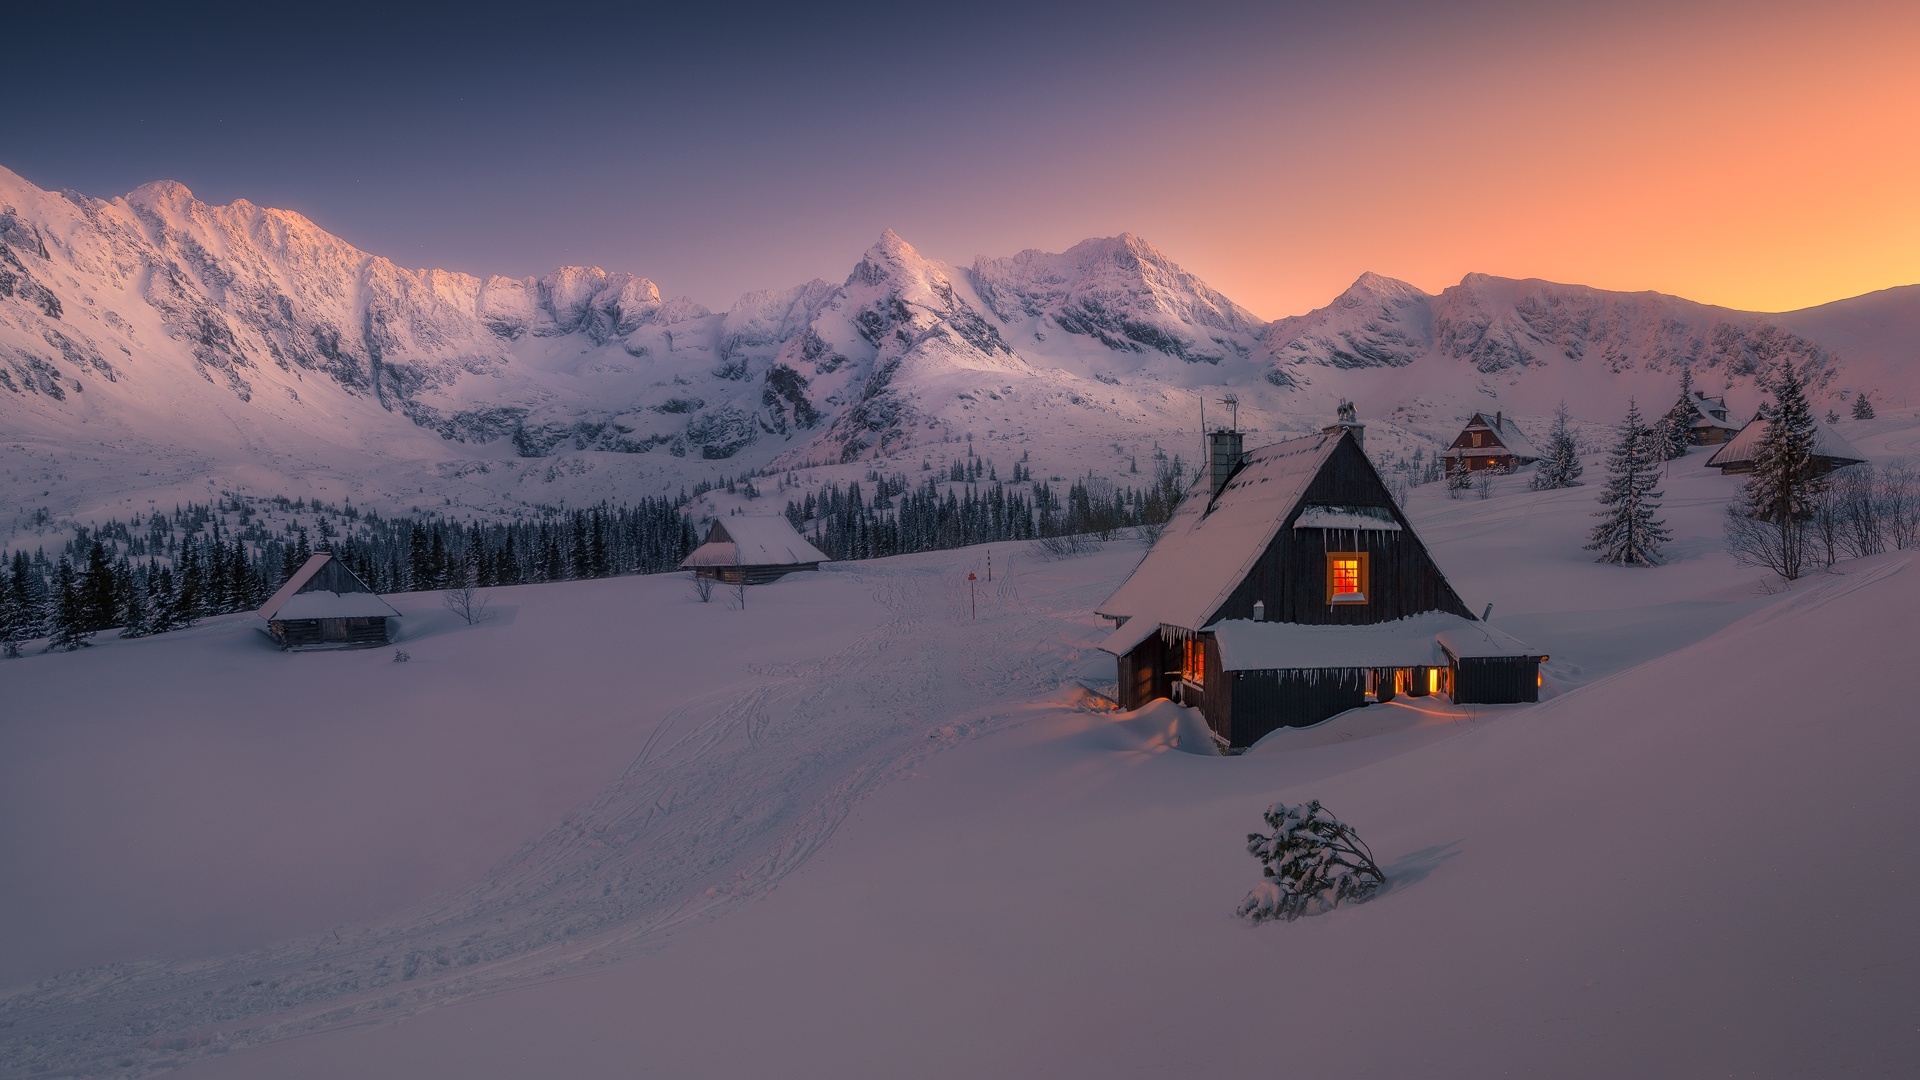 2460x1400 Resolution Evening in Winter Snowy HOuse 2460x1400 Resolution ...